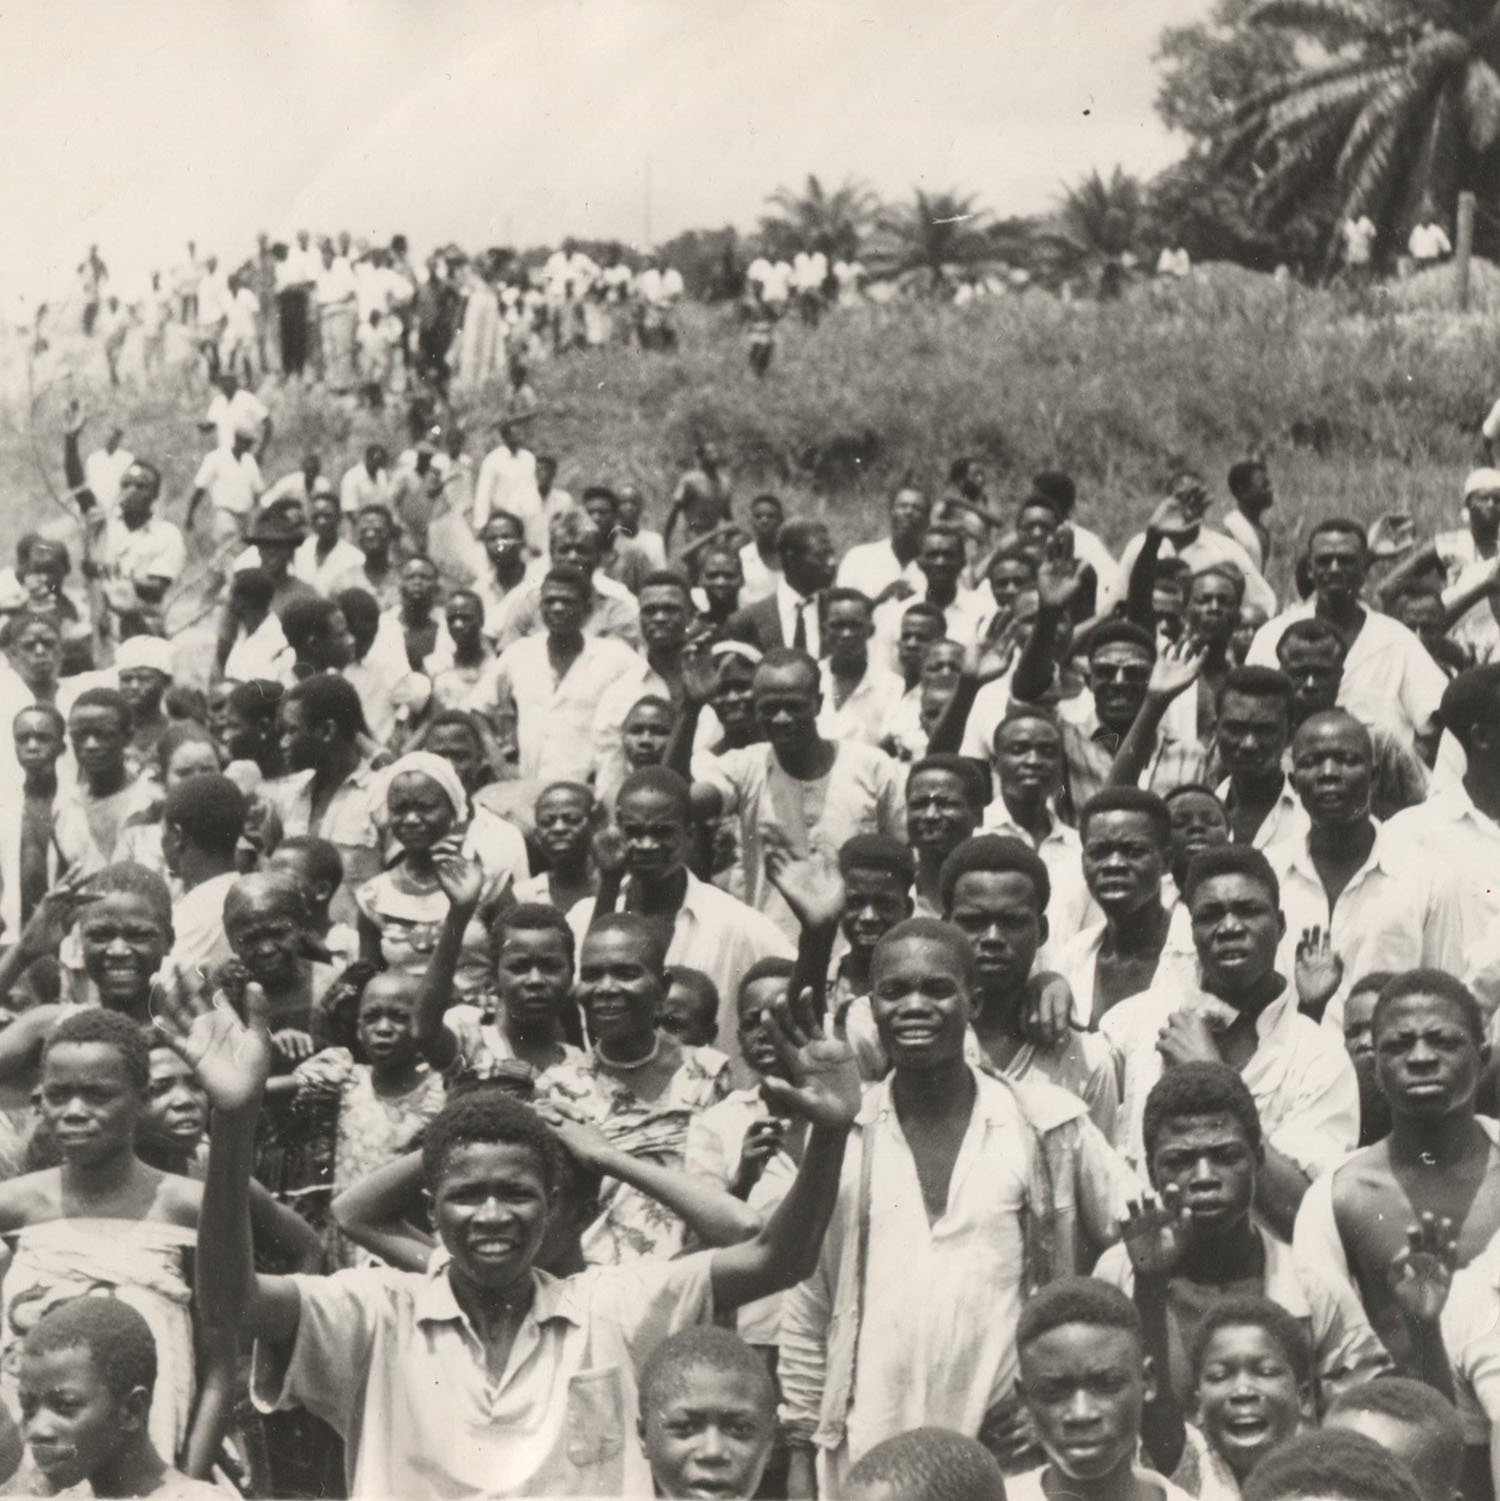 Production still from Congo in Struggle (1960), directed by Leonid Varlamov Photographic print transferred to digital image Archive of Vladlen Troshkin